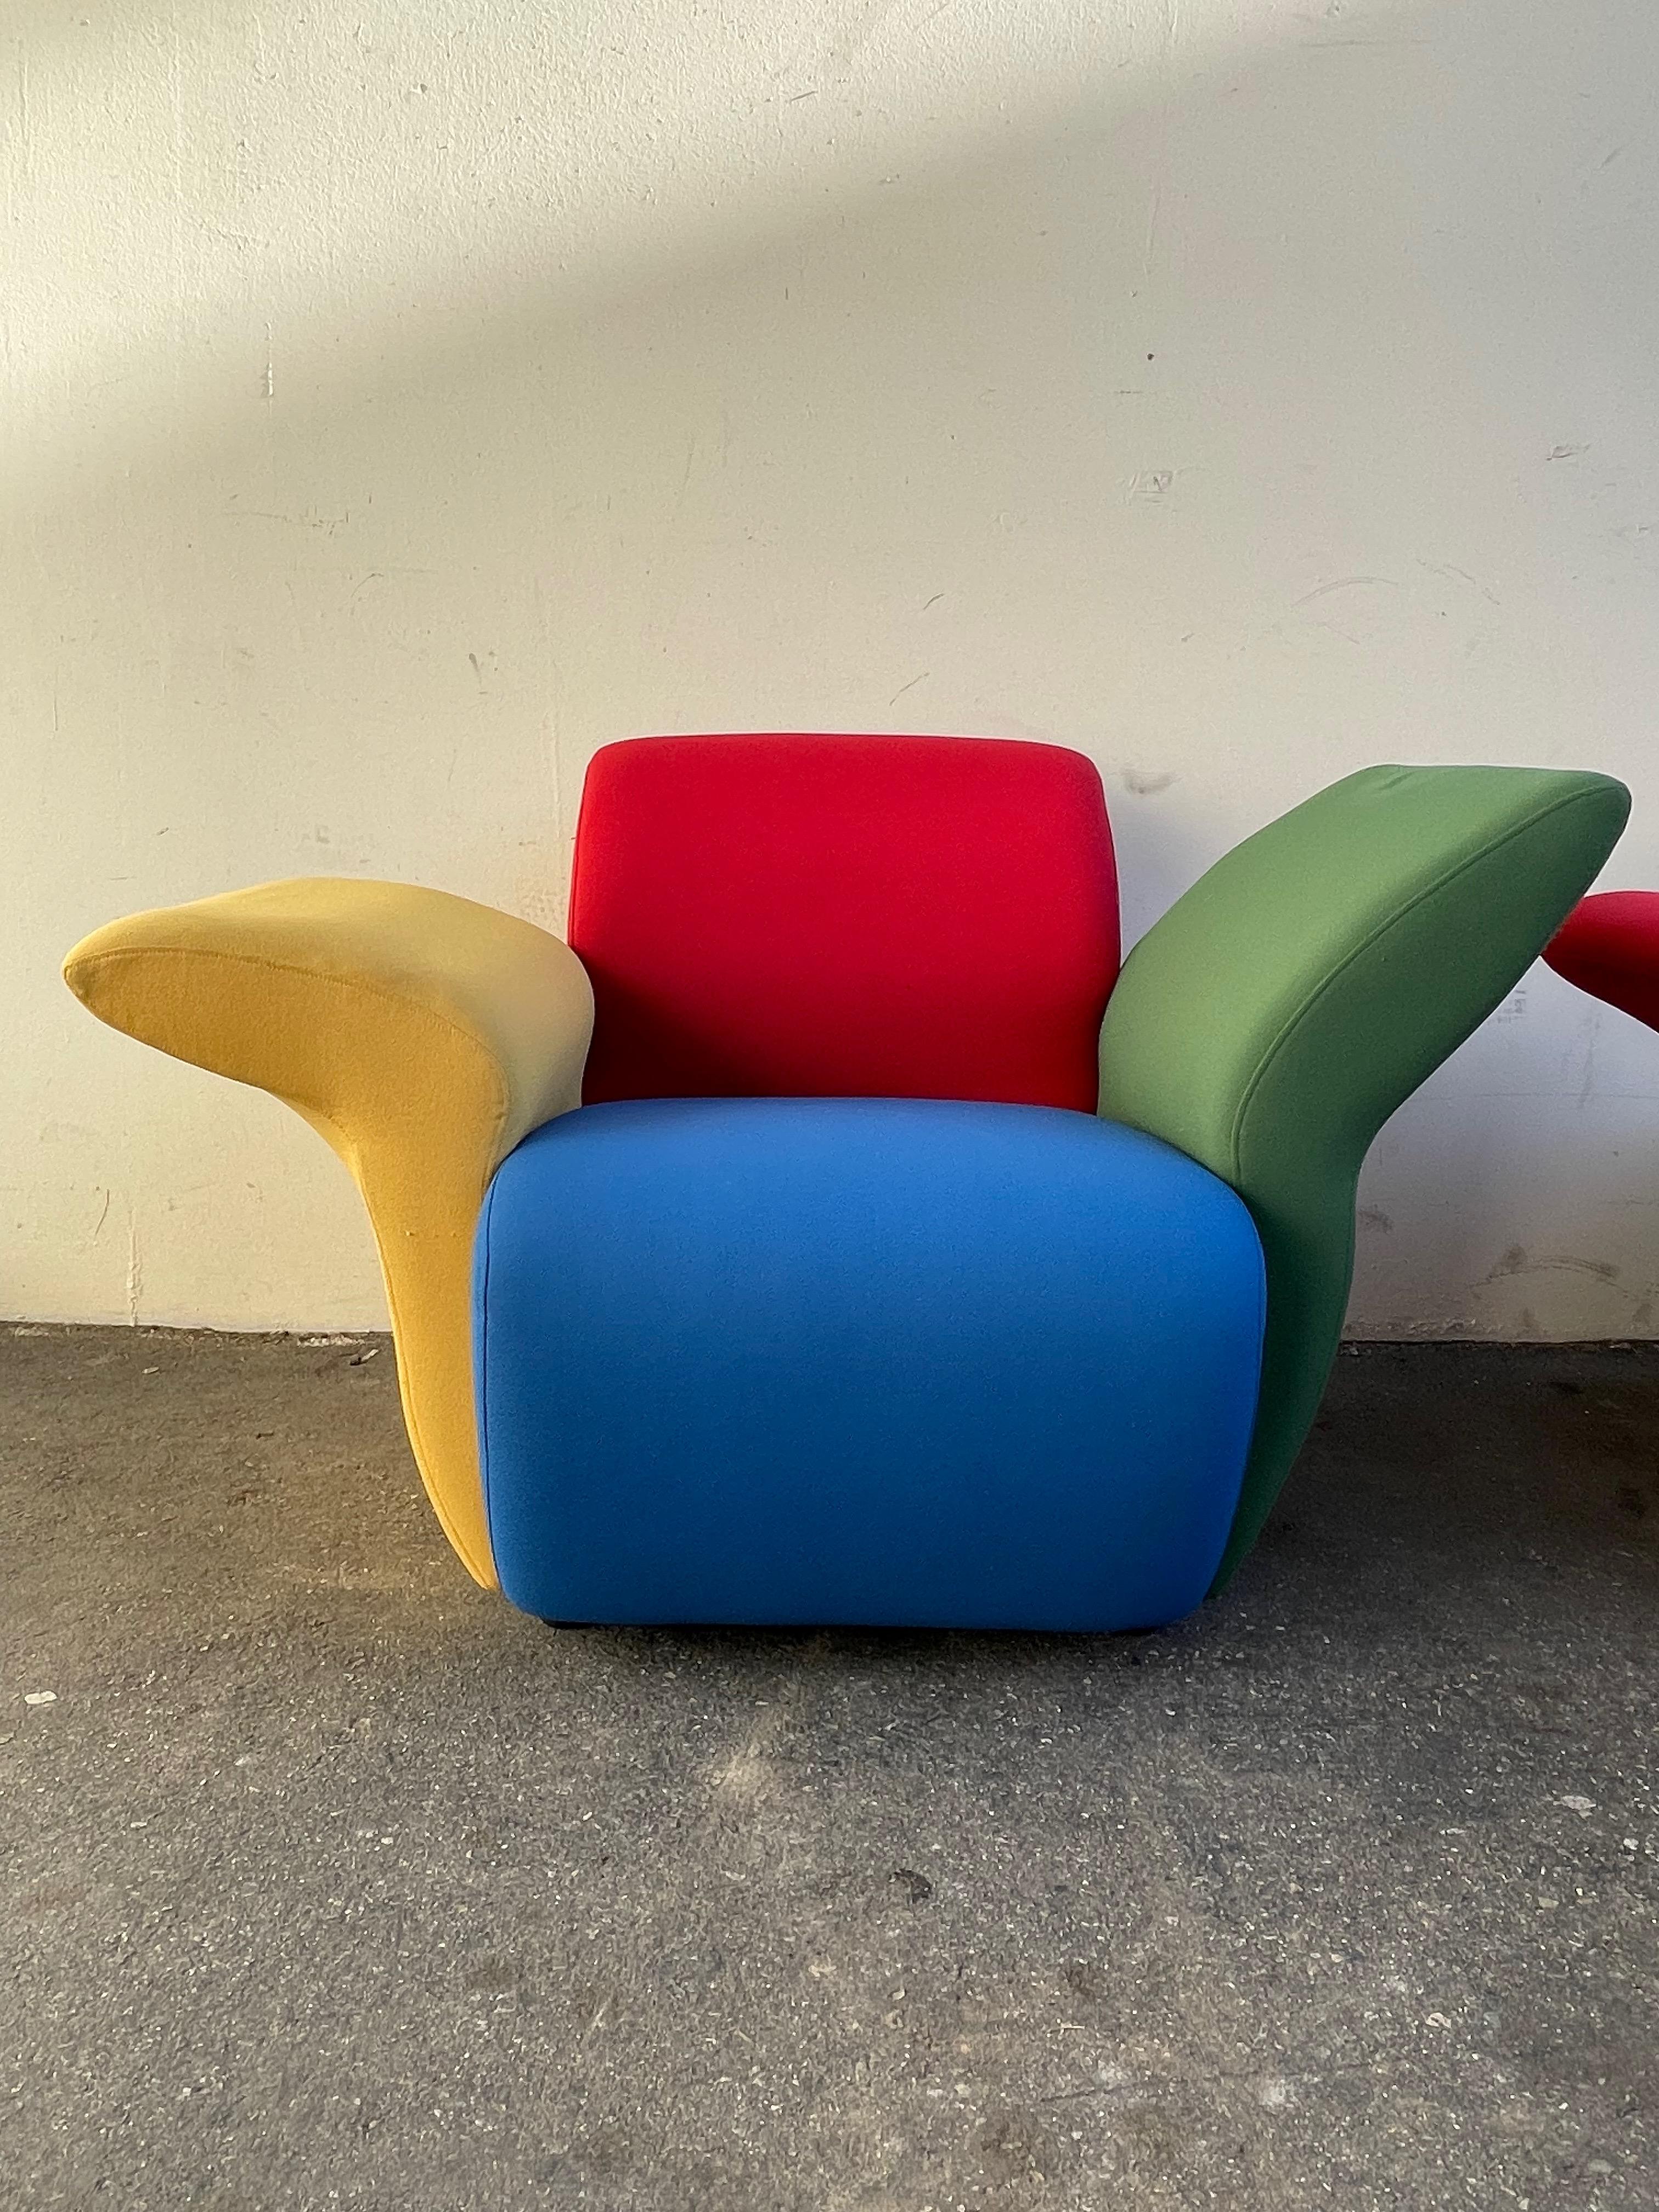 Postmodern Multicolor Lounge Chairs by David Burry, Montreal, 1980s For Sale 6